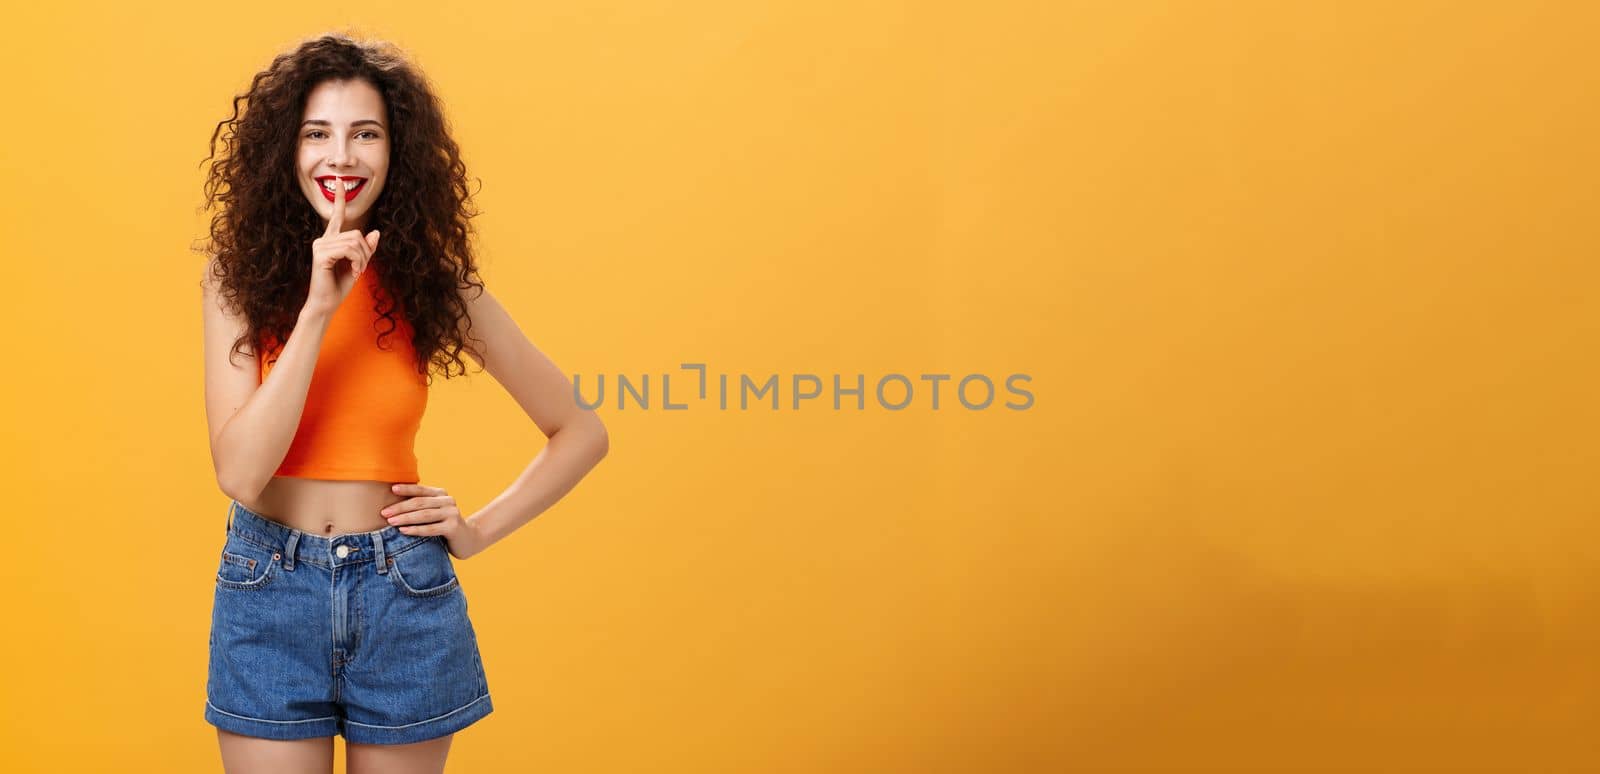 Shh I got something for you. Portrait of charming european young female with curly hairstyle in cropped top and shorts showing shush gesture with broad smile having secret preparing surprise.